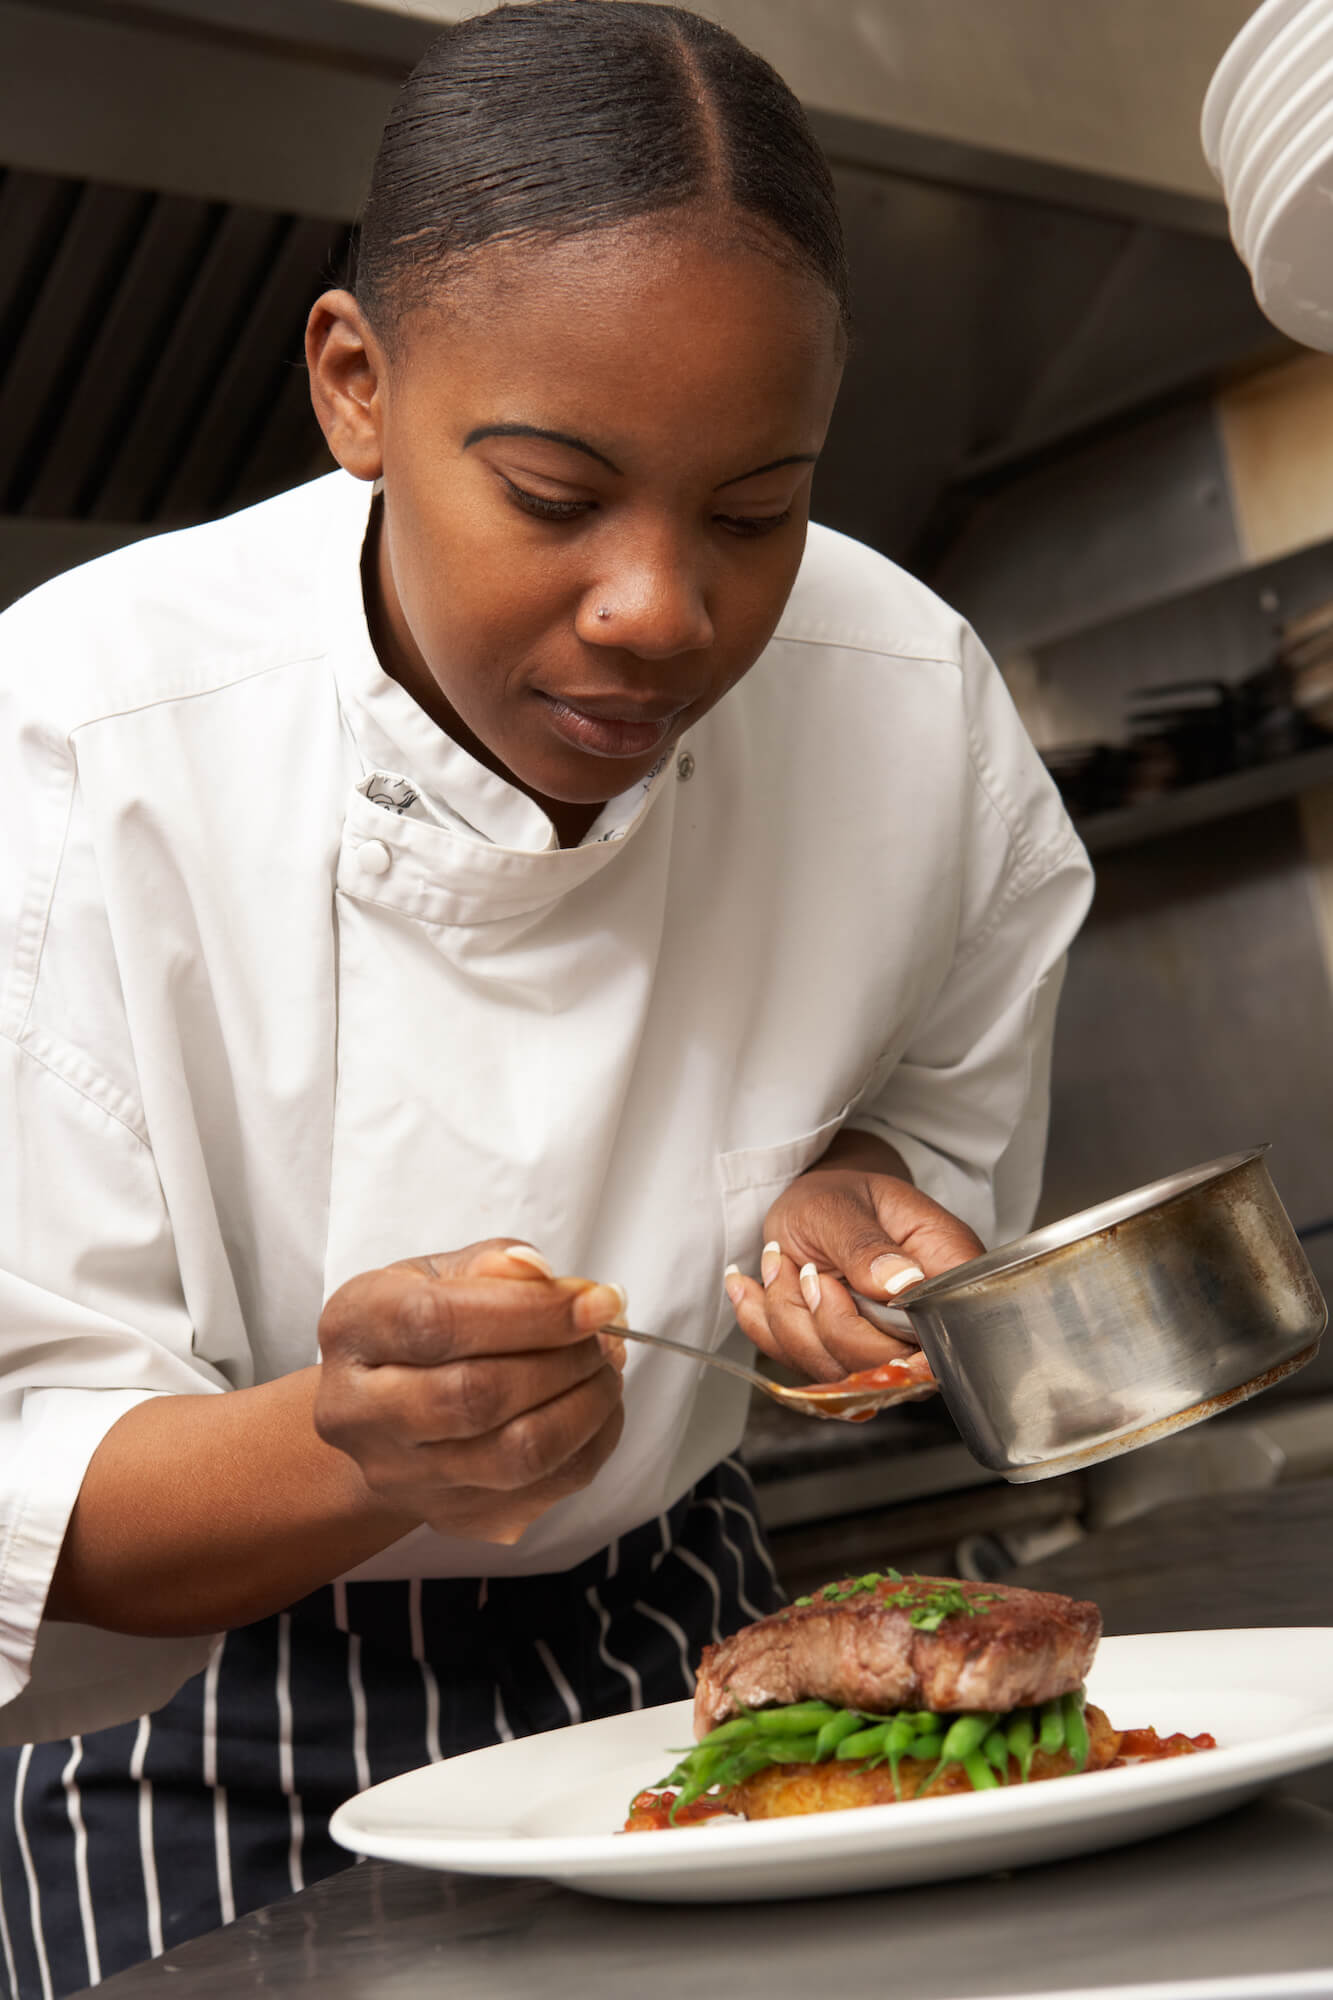 private chef services, get hired as personal chef, personal chef jobs